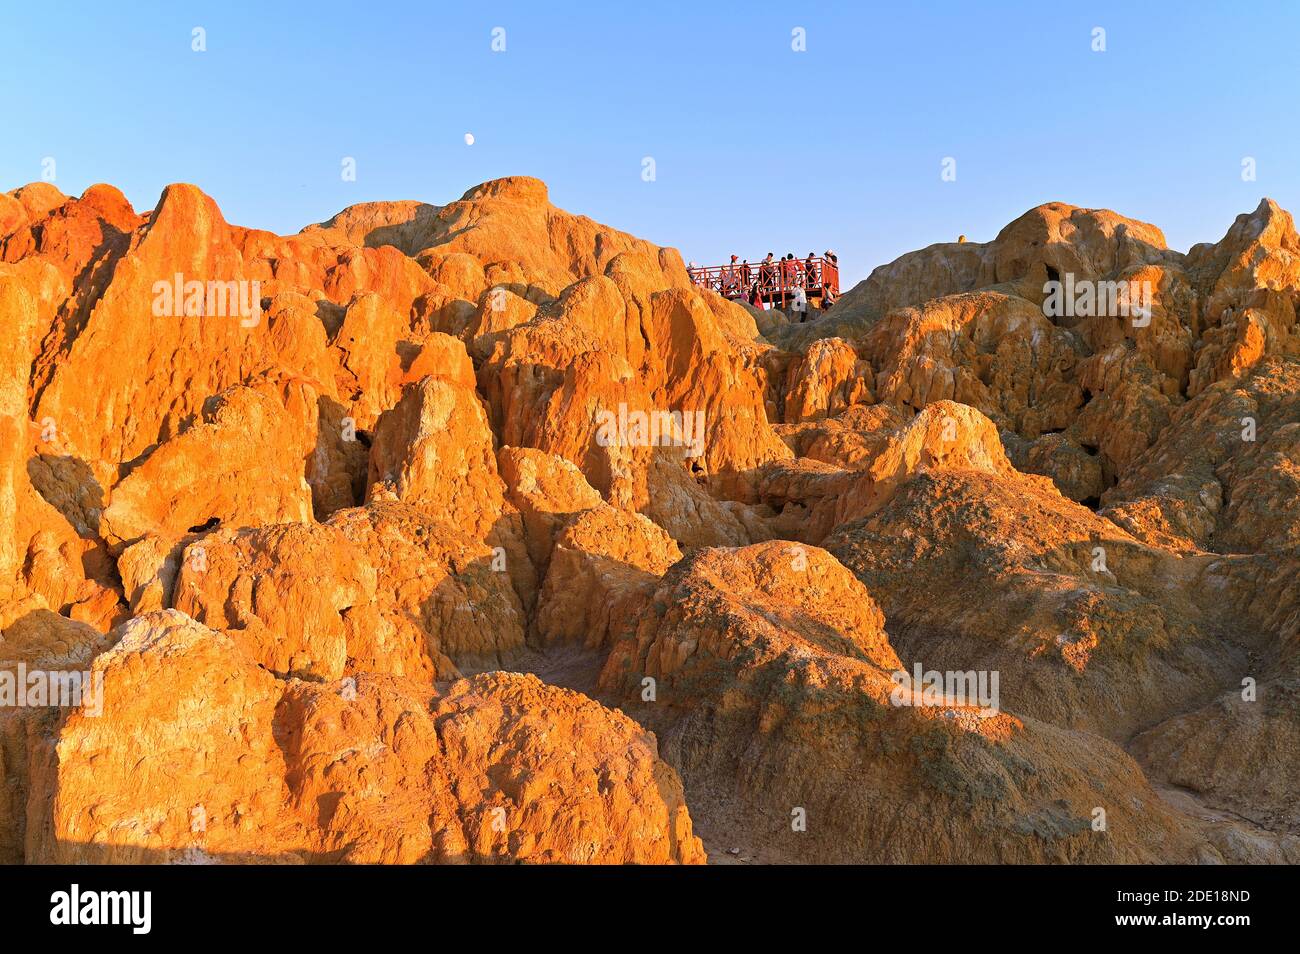 Chinese tourists at viewing point over the multi-colored eroded rock formations at Wucaitan, Five-Colored Beach, Burqin County, Northern Xinjiang Stock Photo